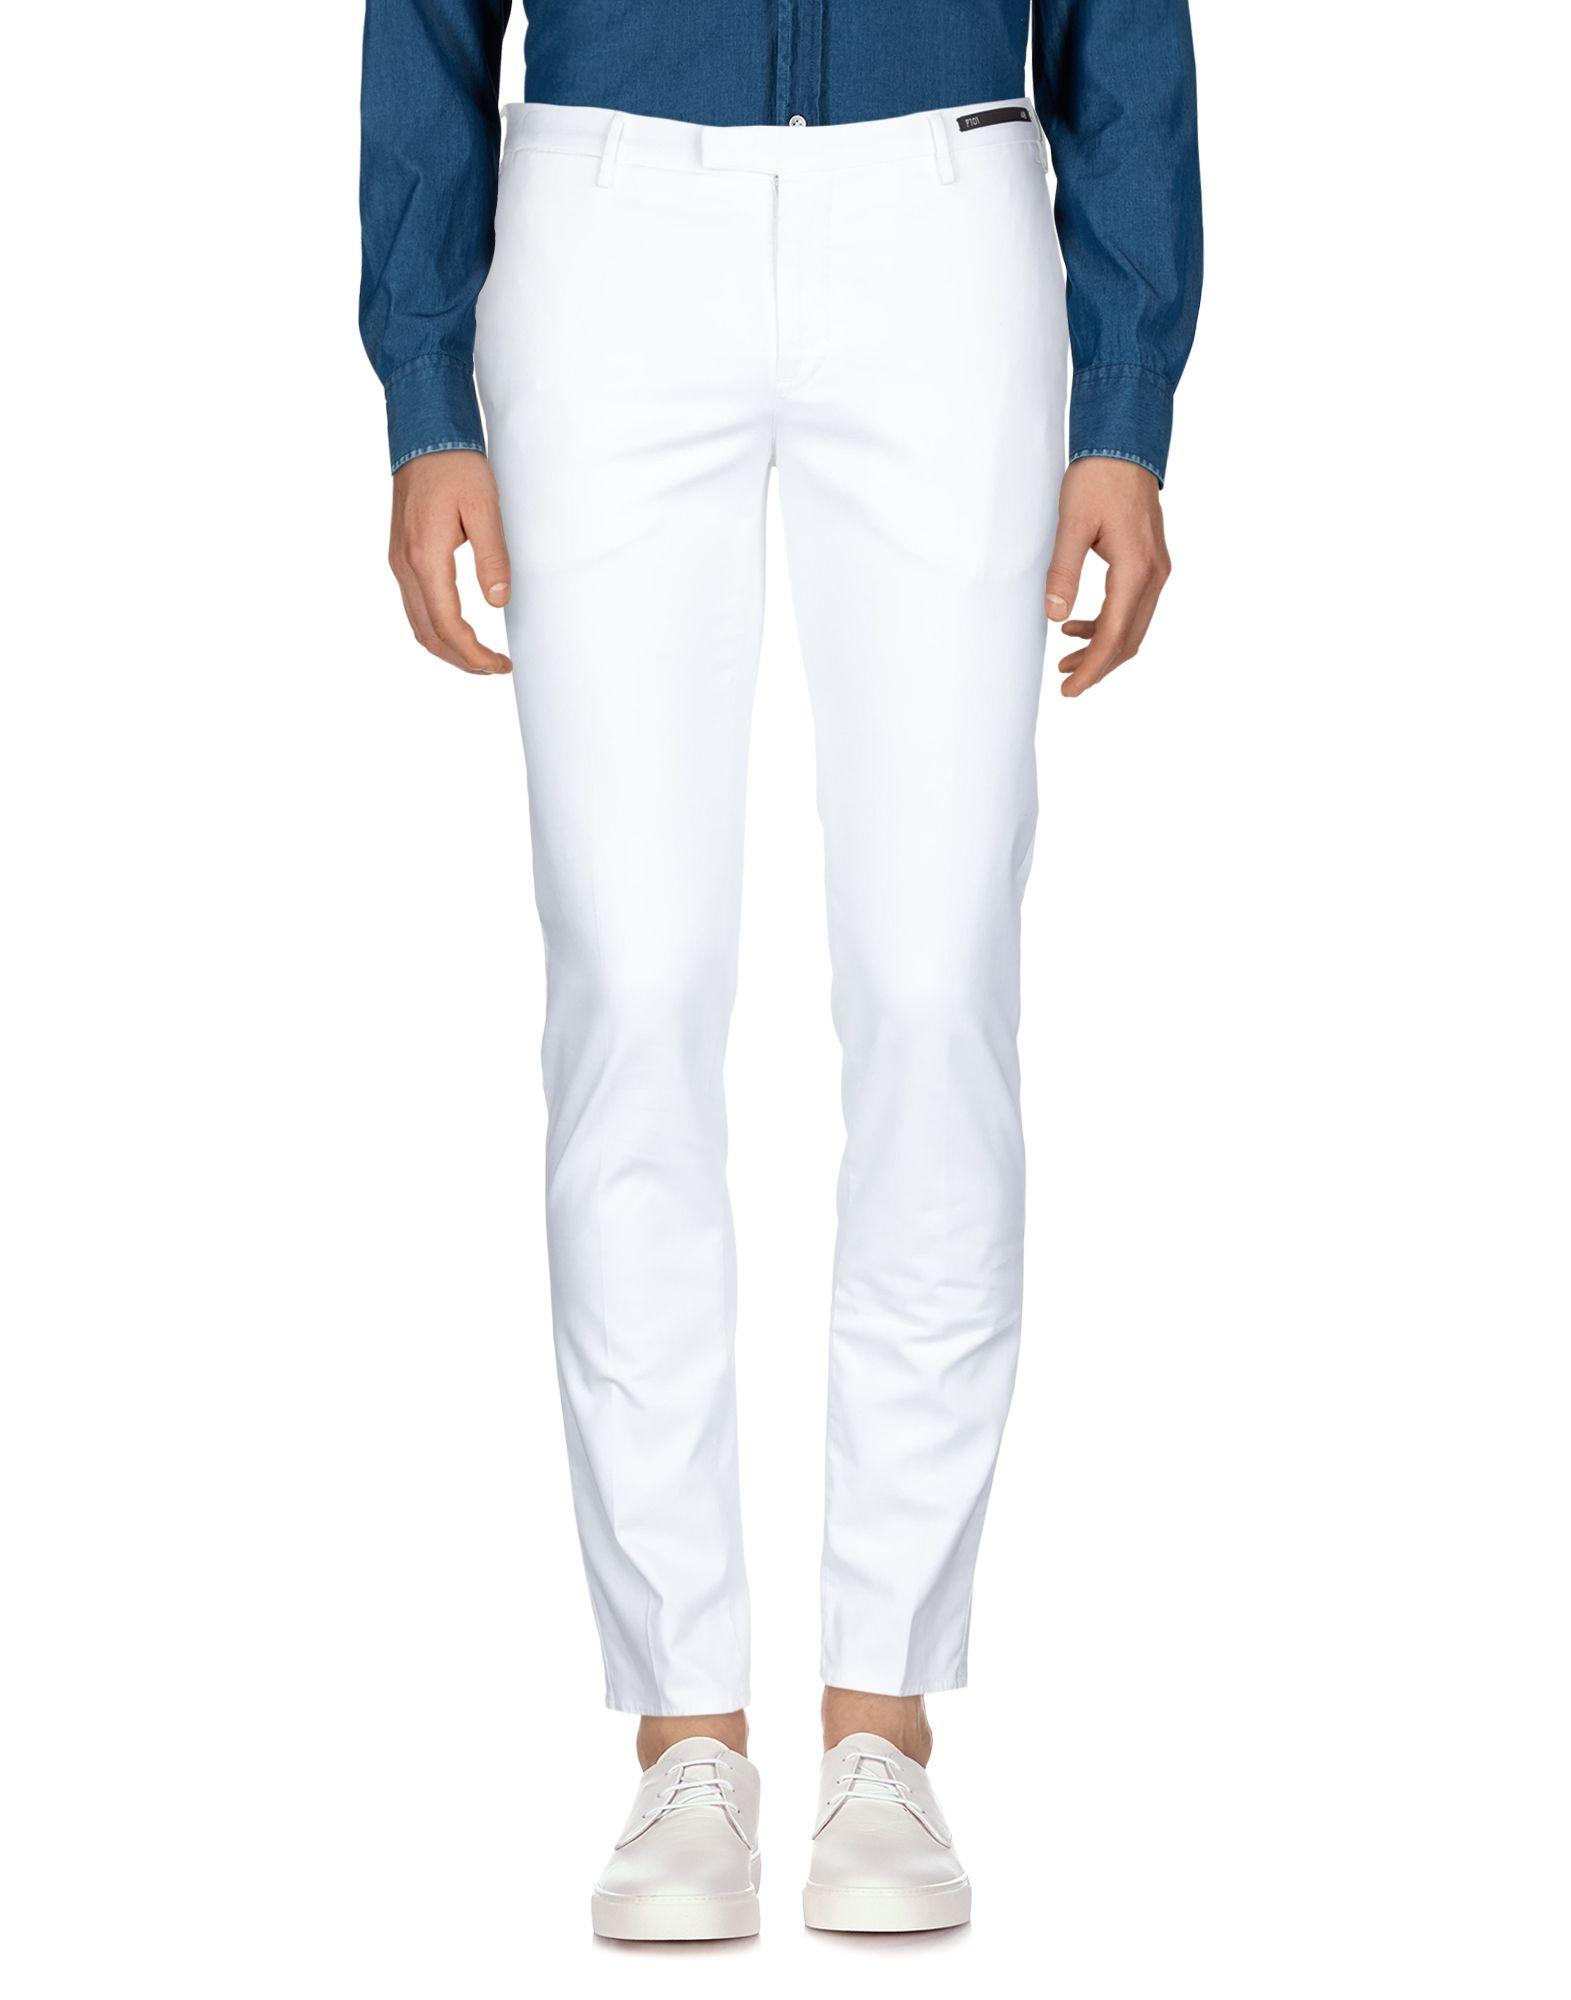 PT01 Cotton Casual Trouser in White for Men - Lyst